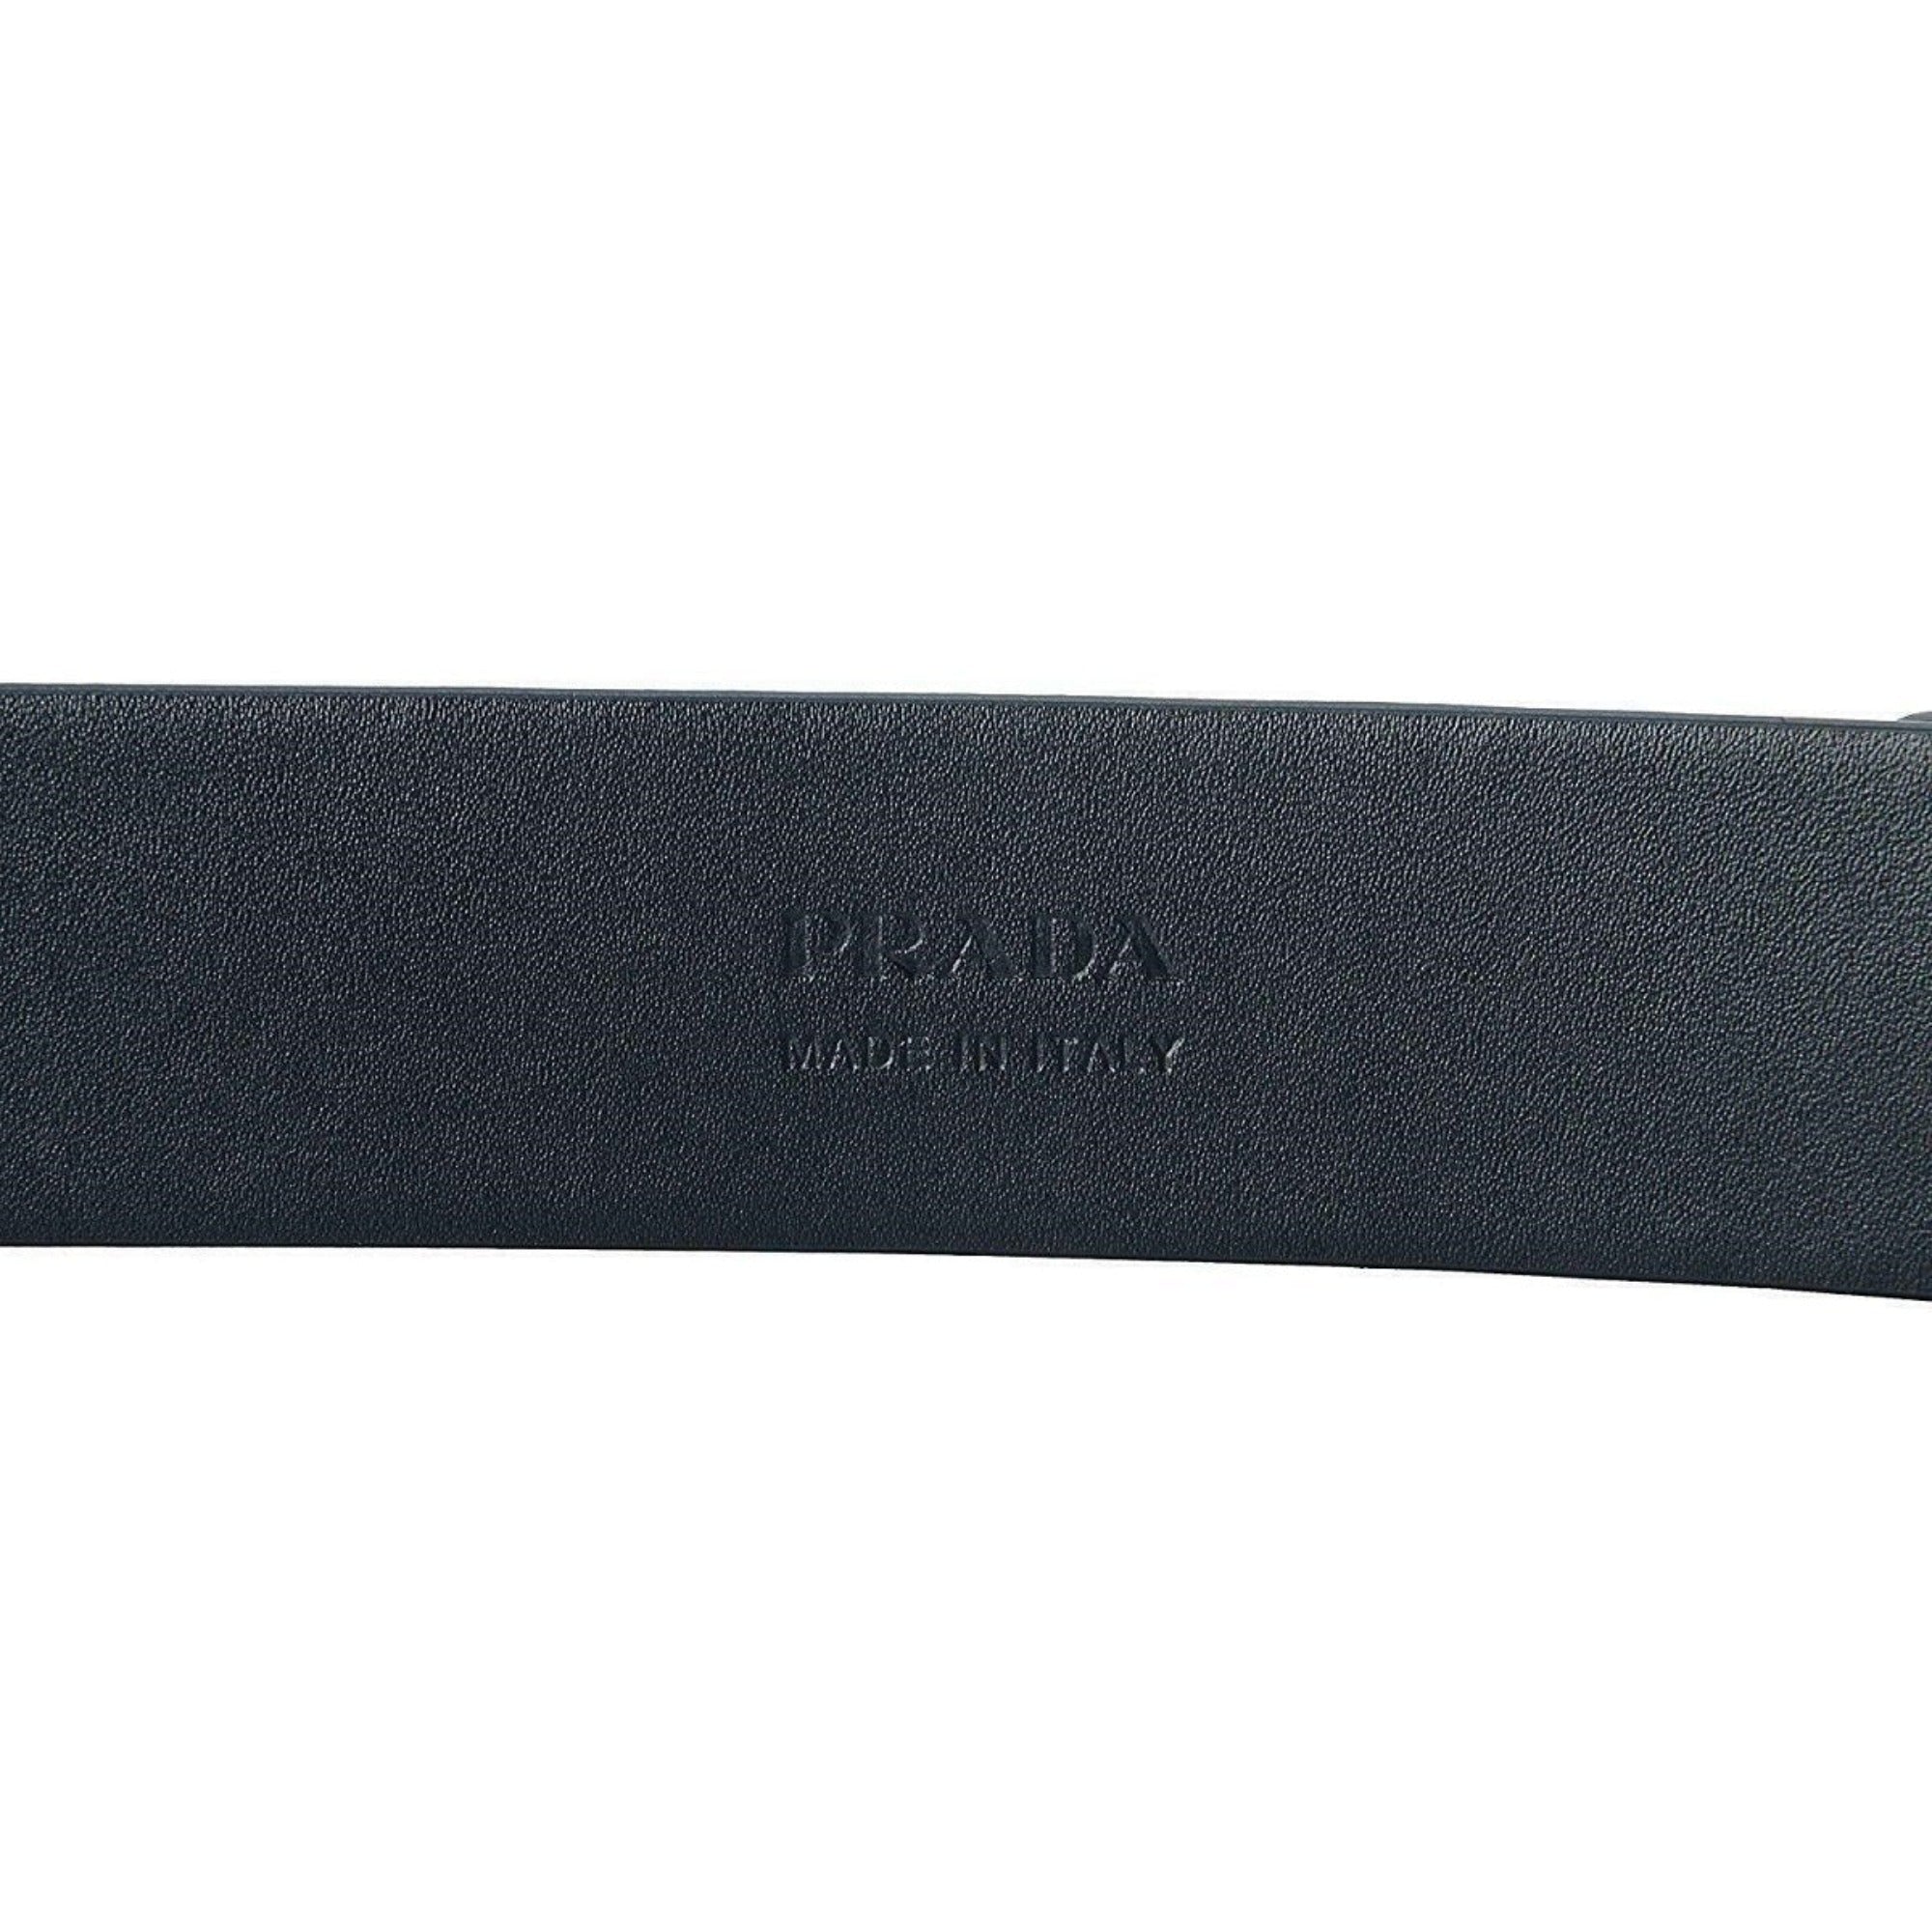 Prada Navy Blue Saffiano Leather Belt Brushed Silver Buckle 105/42 2CM046 at_Queen_Bee_of_Beverly_Hills